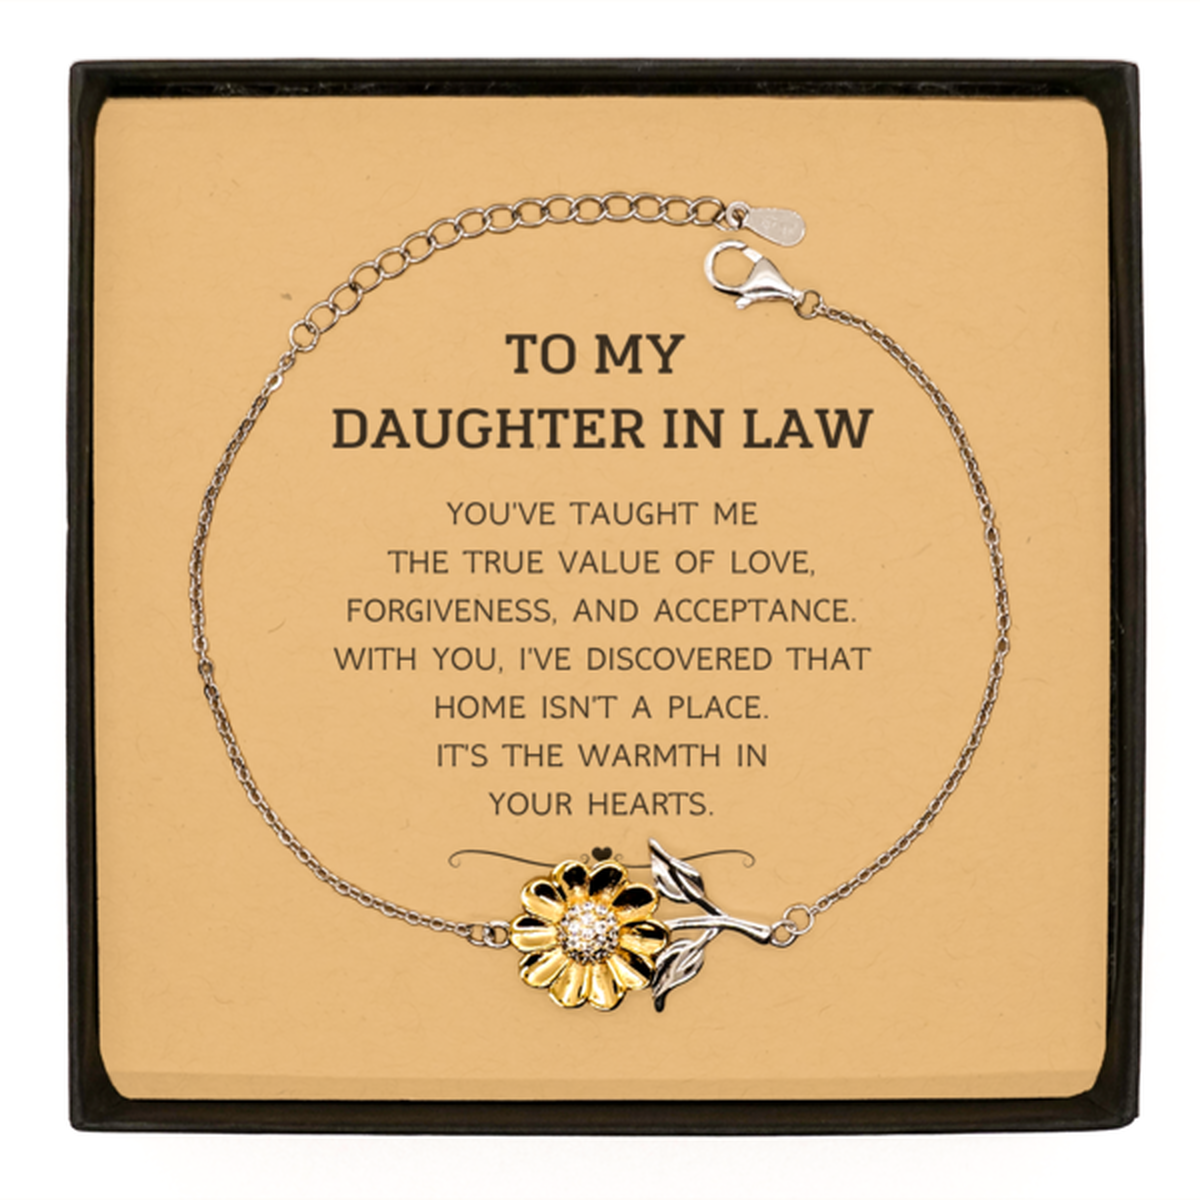 To My Daughter In Law Gifts, You've taught me the true value of love, Thank You Gifts For Daughter In Law, Birthday Sunflower Bracelet For Daughter In Law